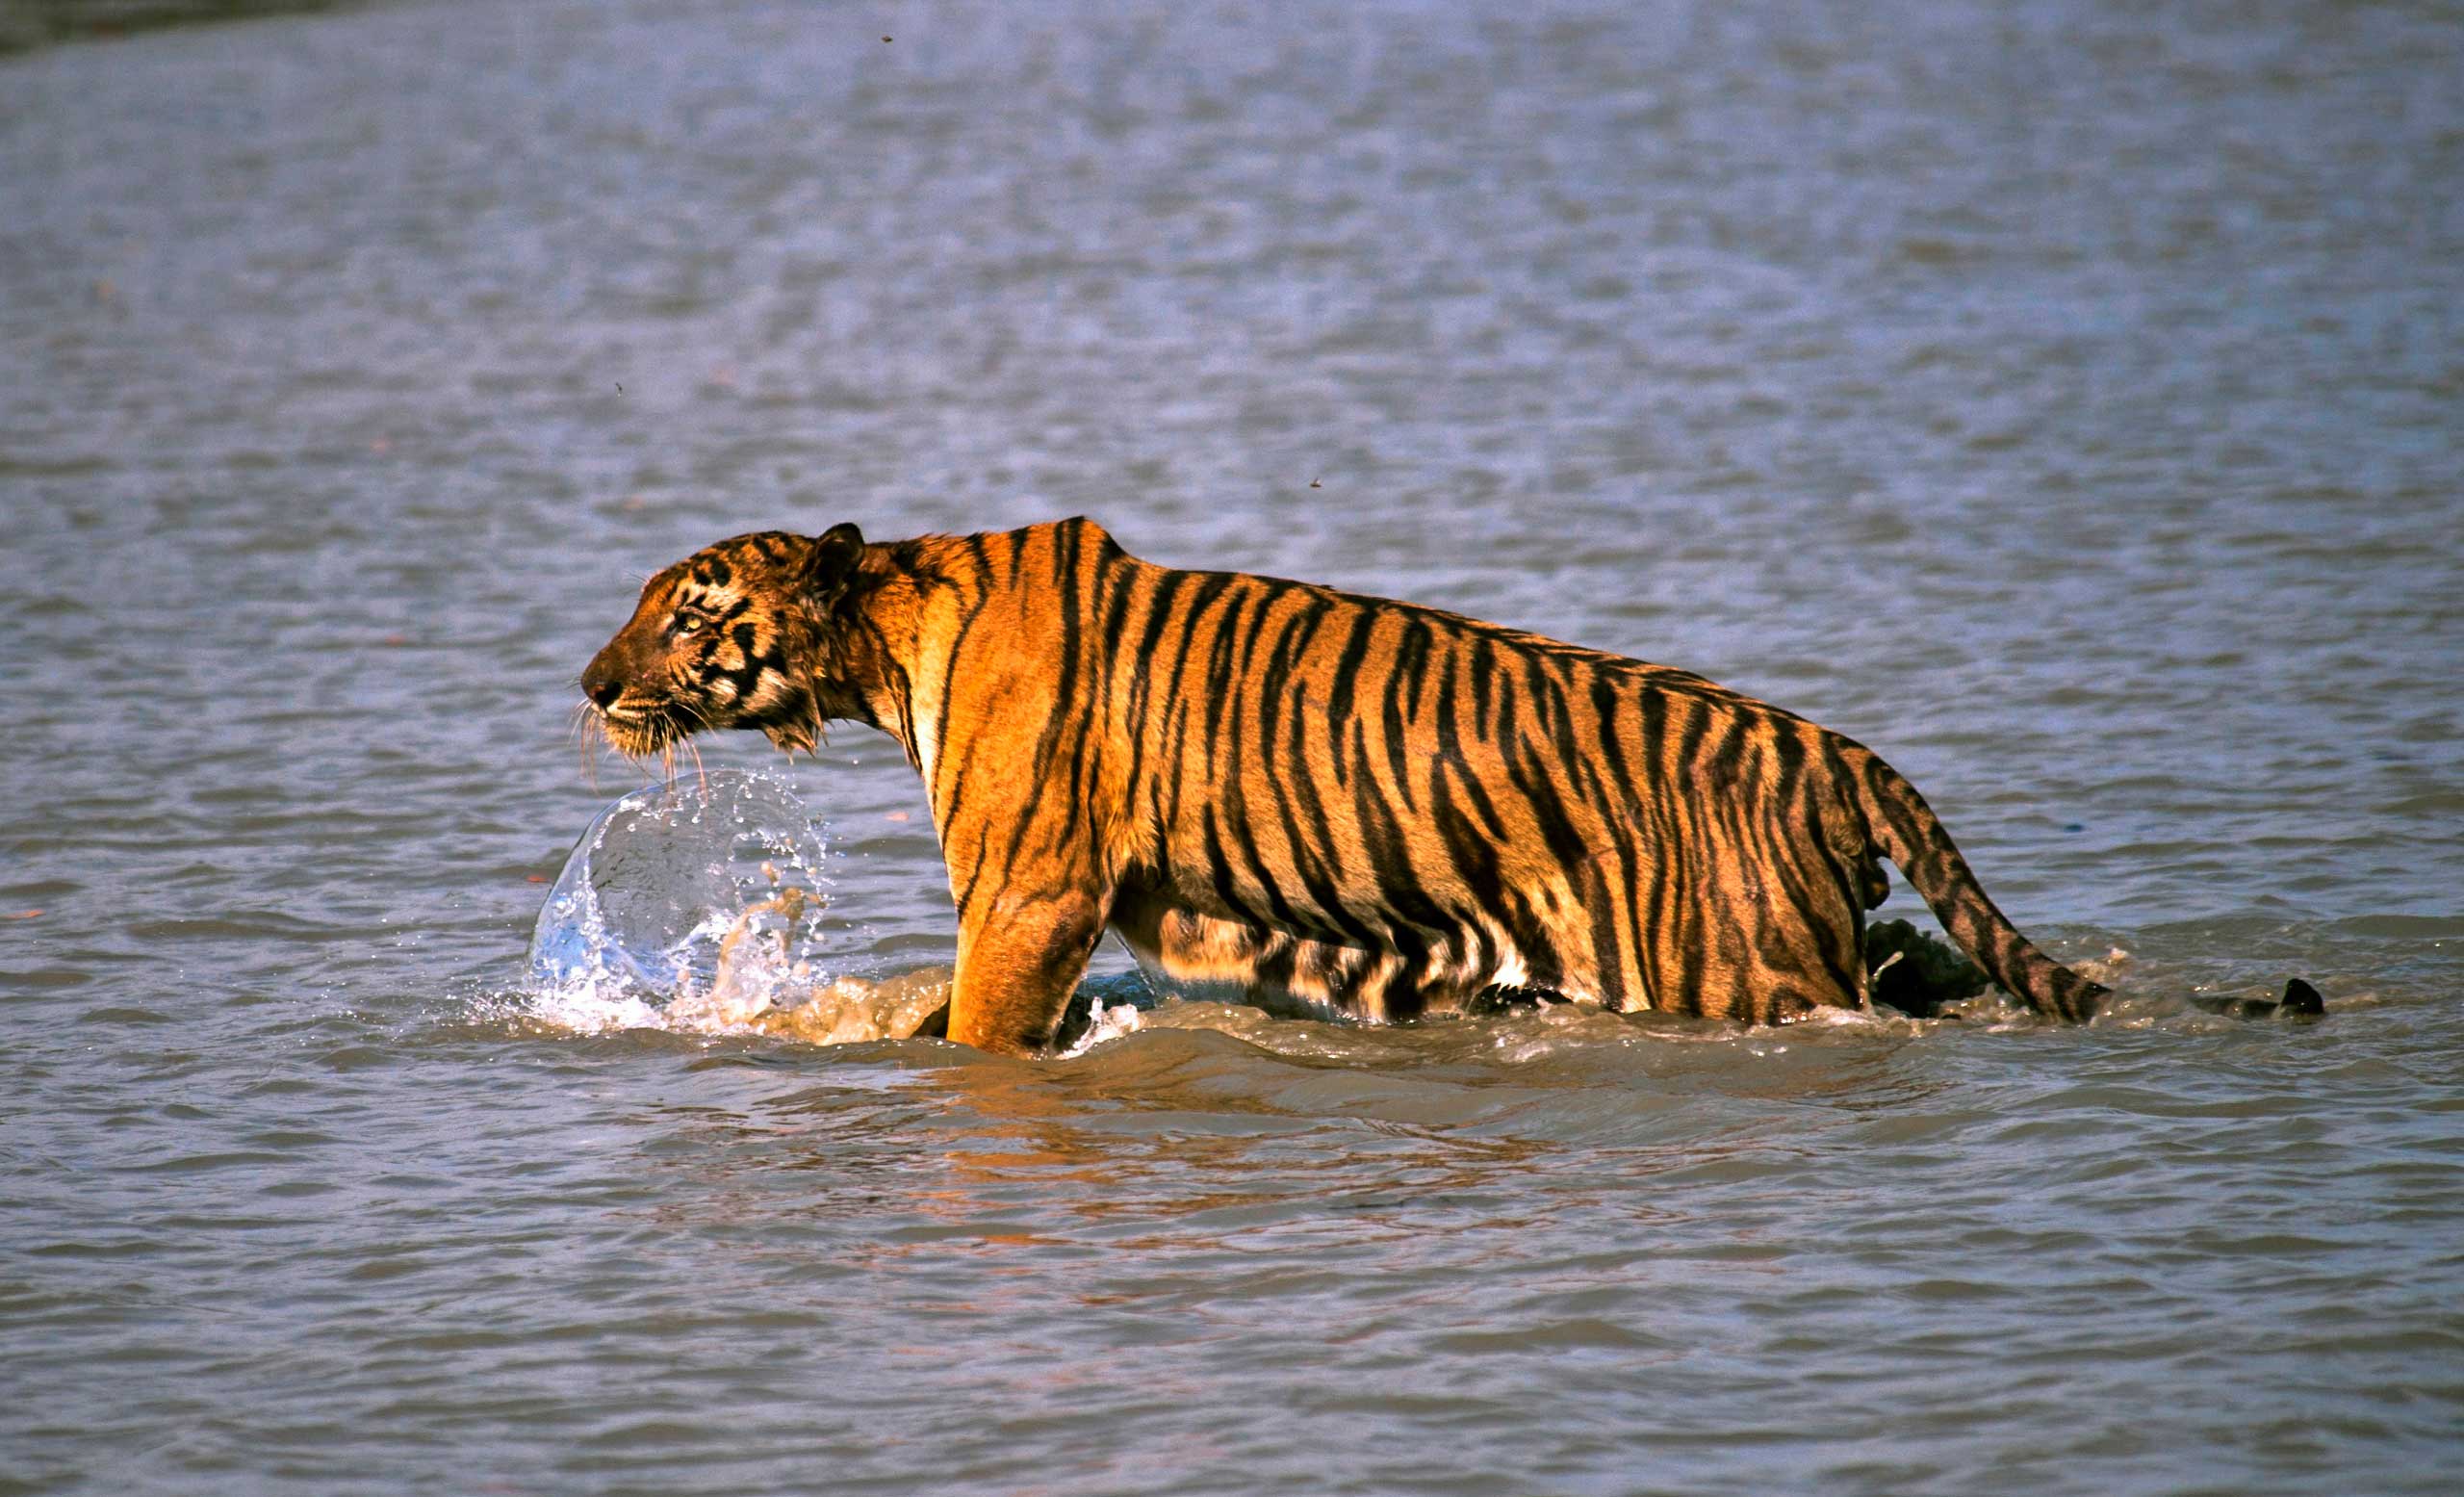 ARoyal Bengal tiger prowls in Sunderbans, at the Sunderban delta, about 130 kilometers (81 miles) south of Calcutta, India on April 26, 2014. (Joydip Kundu—AP)